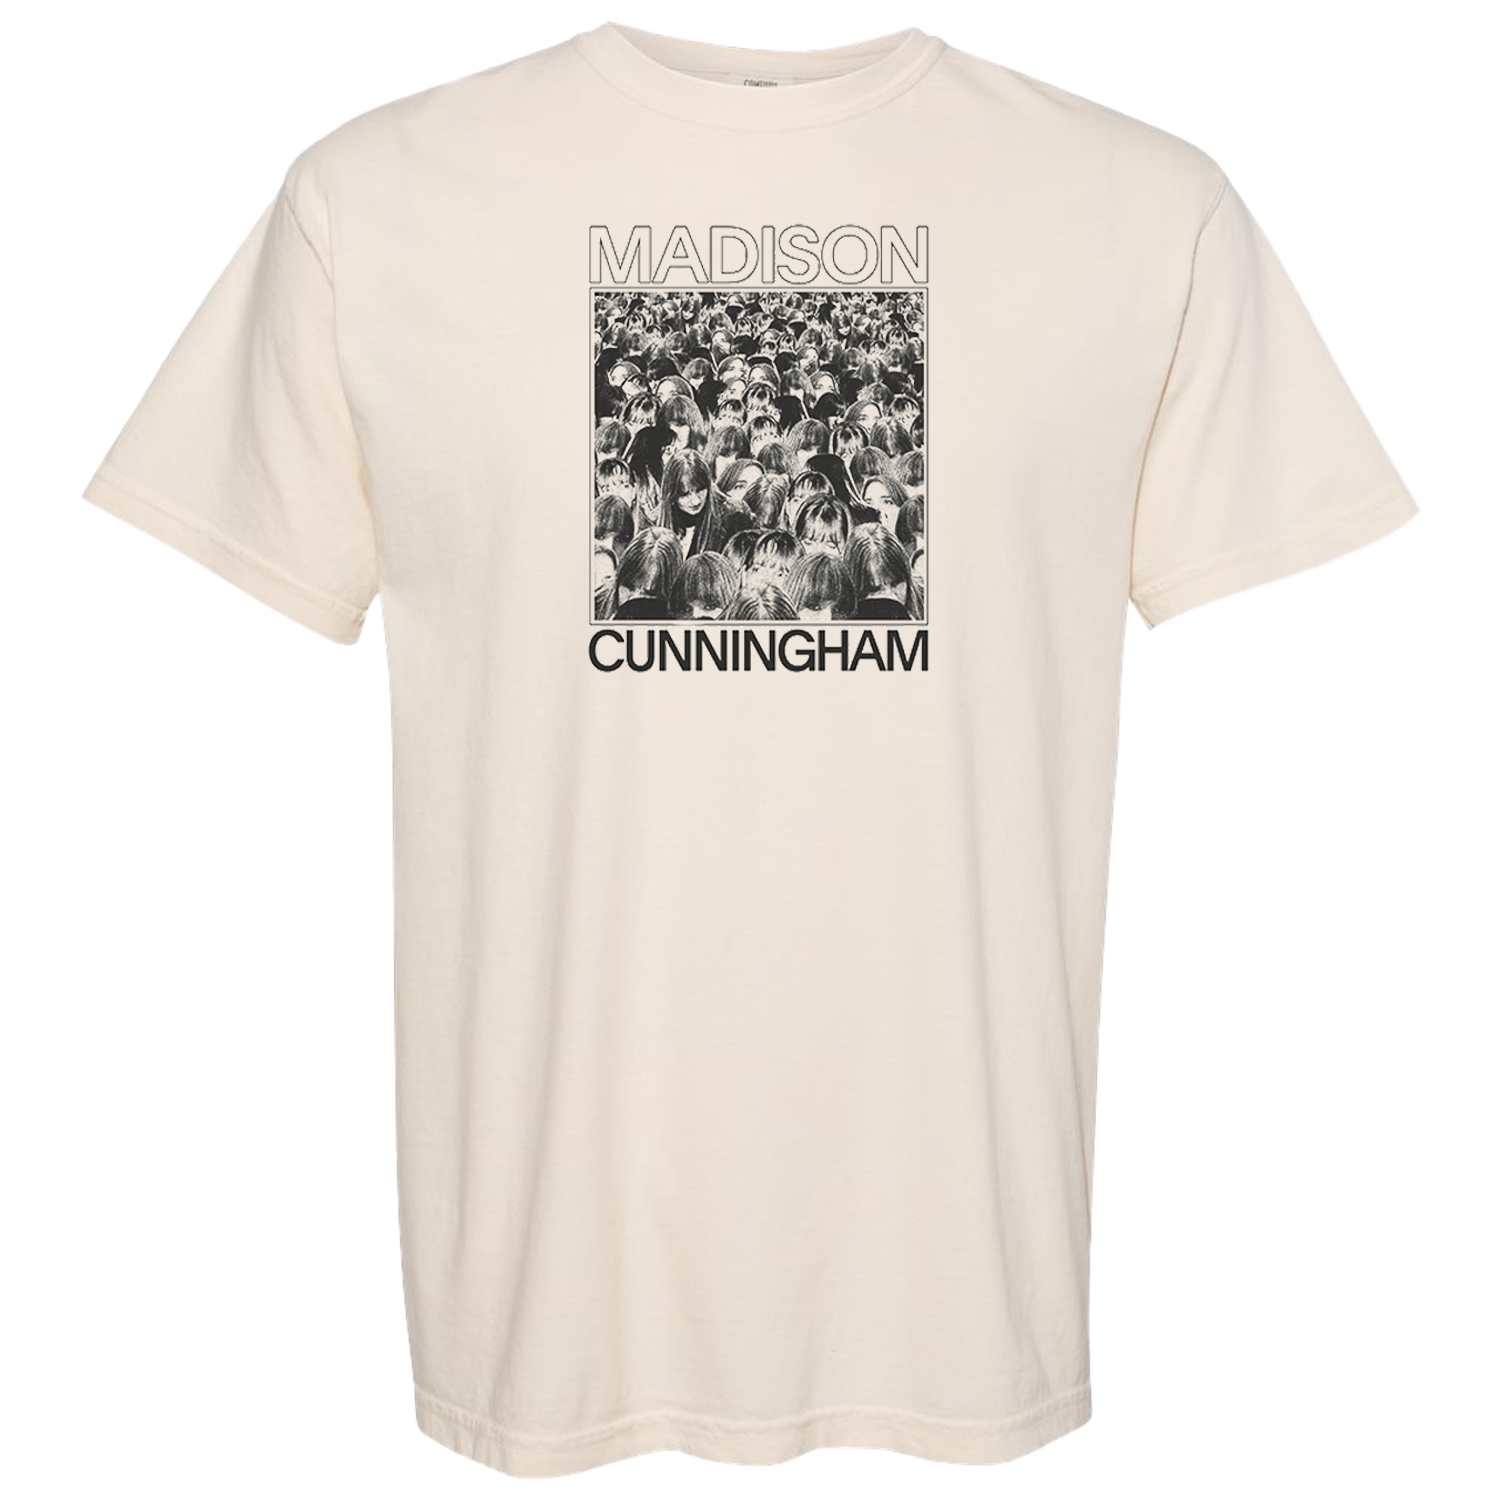 Faces In A Crowd T-Shirt